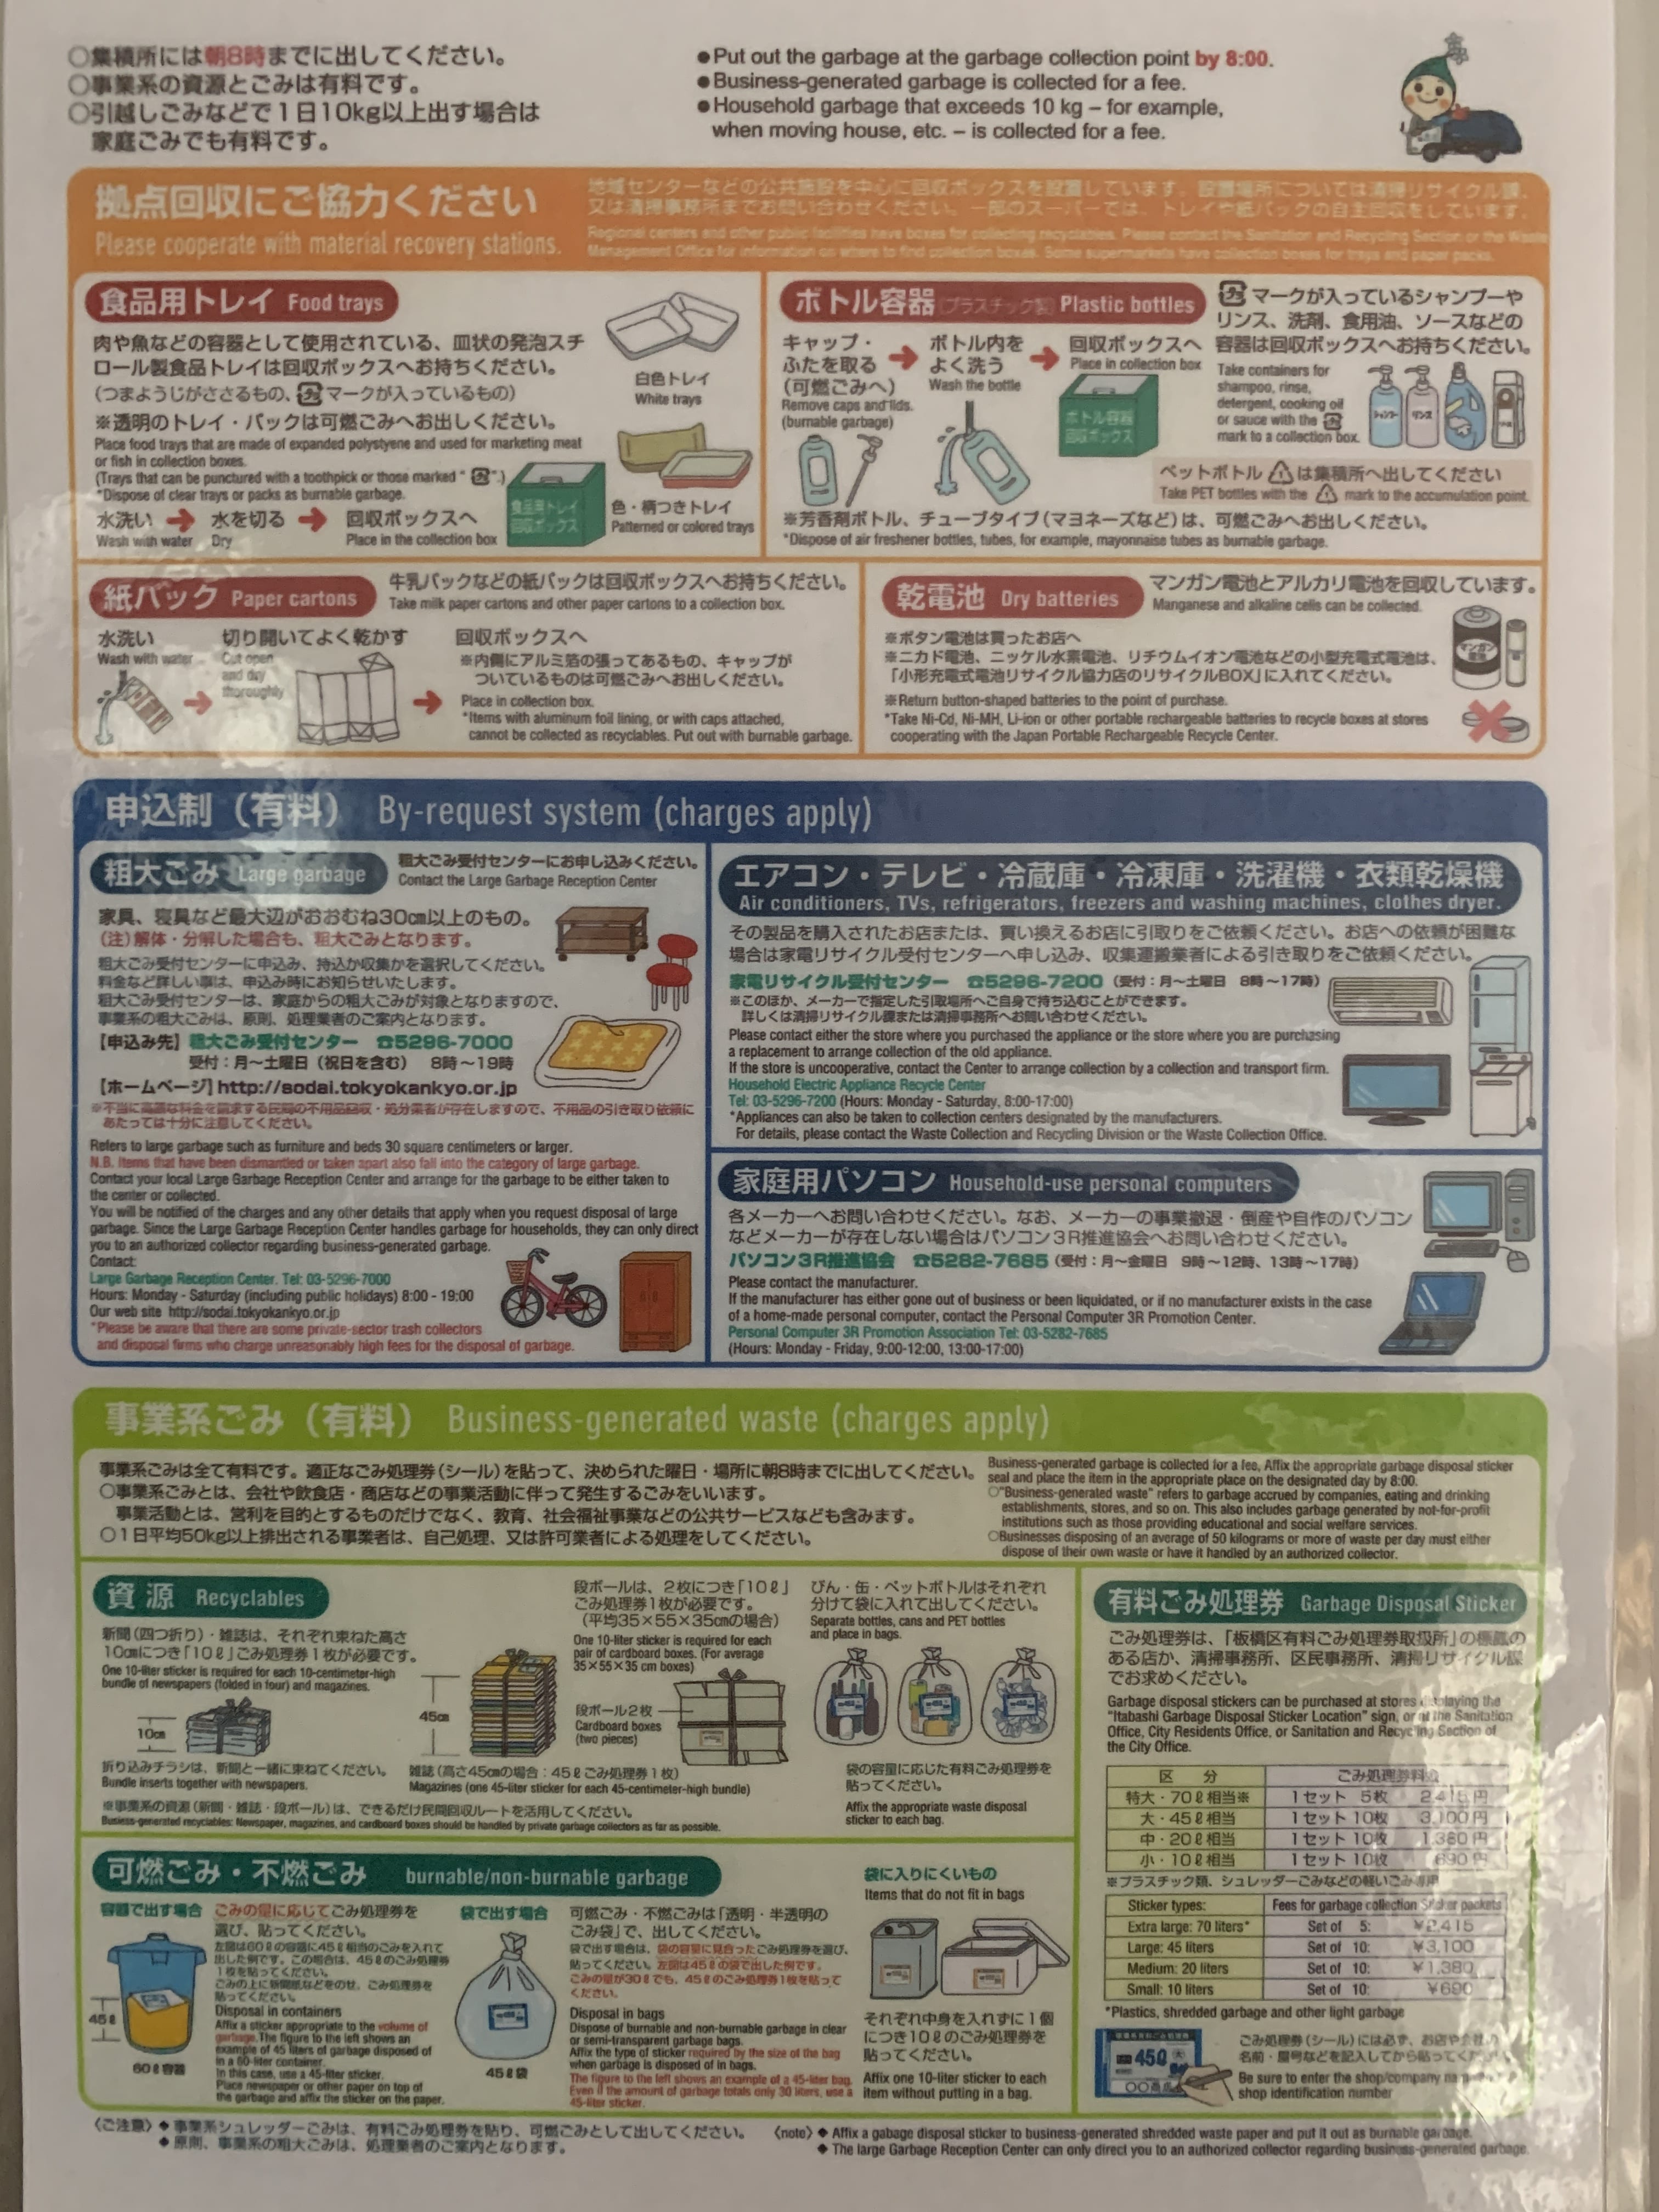 Garbage Disposal and Recycling in Japan